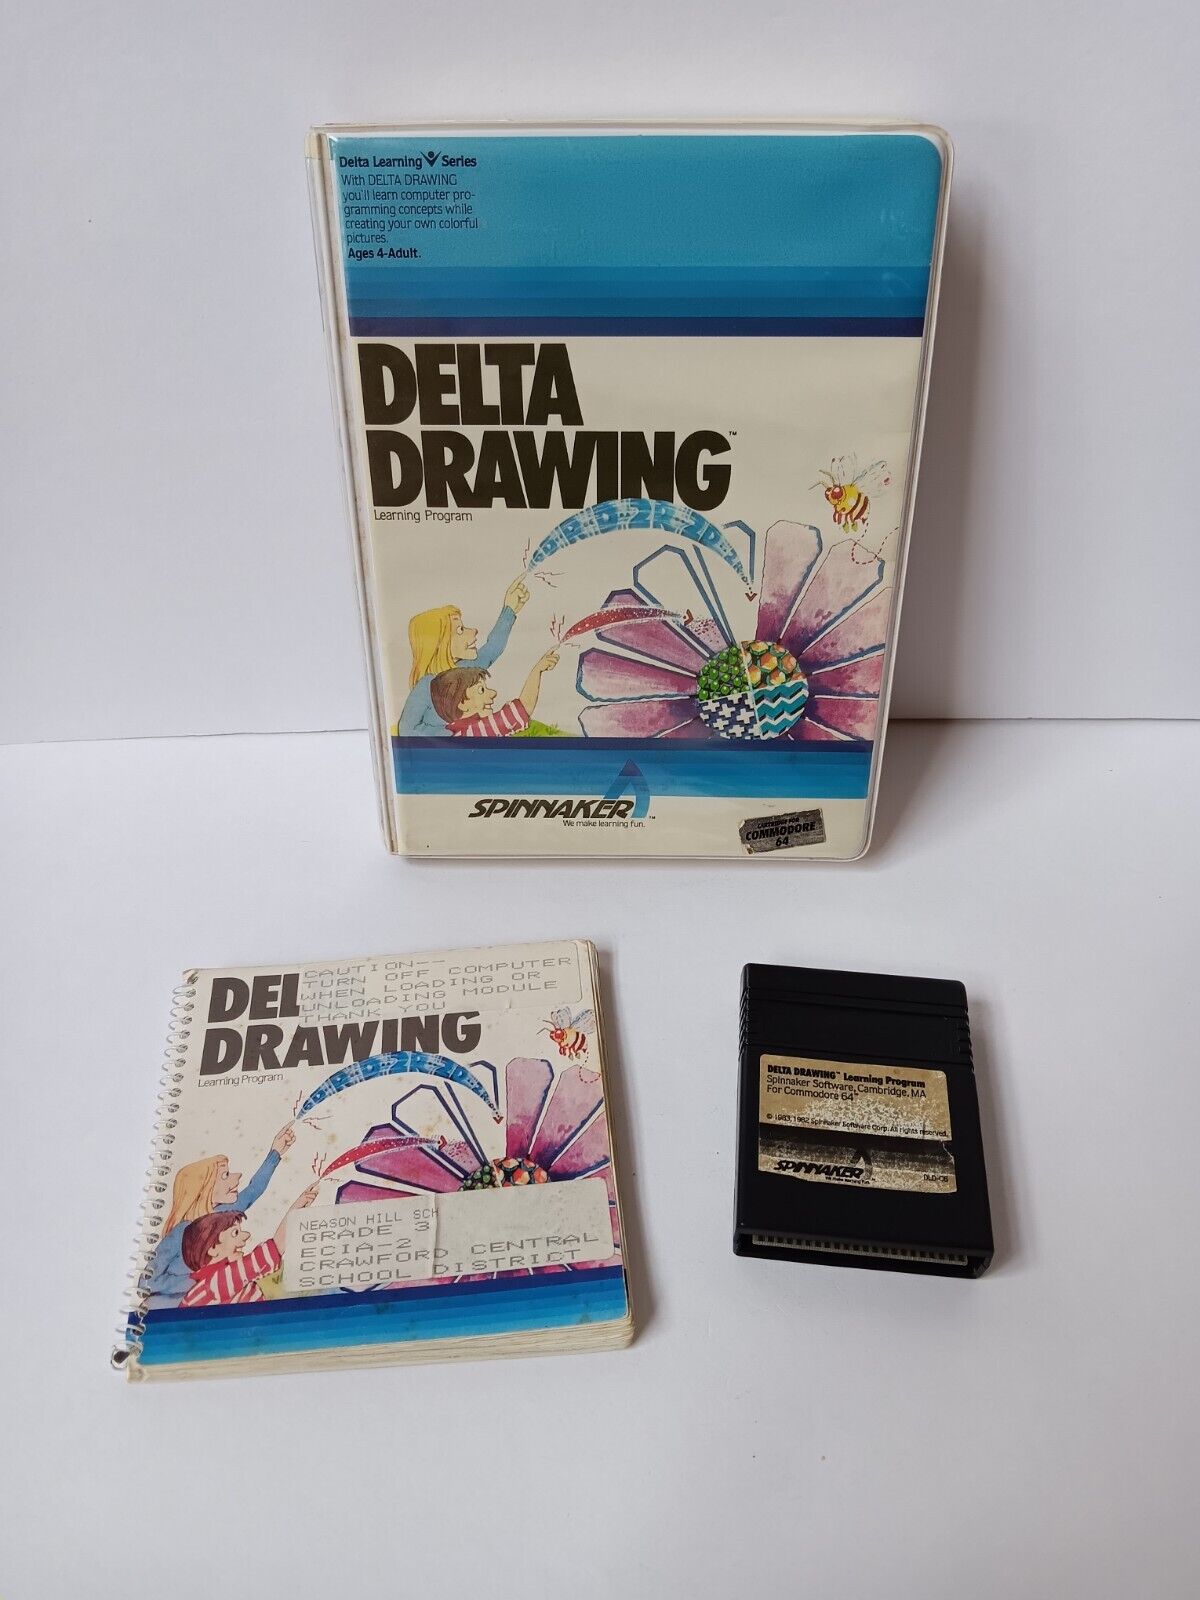 Commodore 64 Delta Drawing Computer Game Cartridge W/Manual & Case Tested/Works